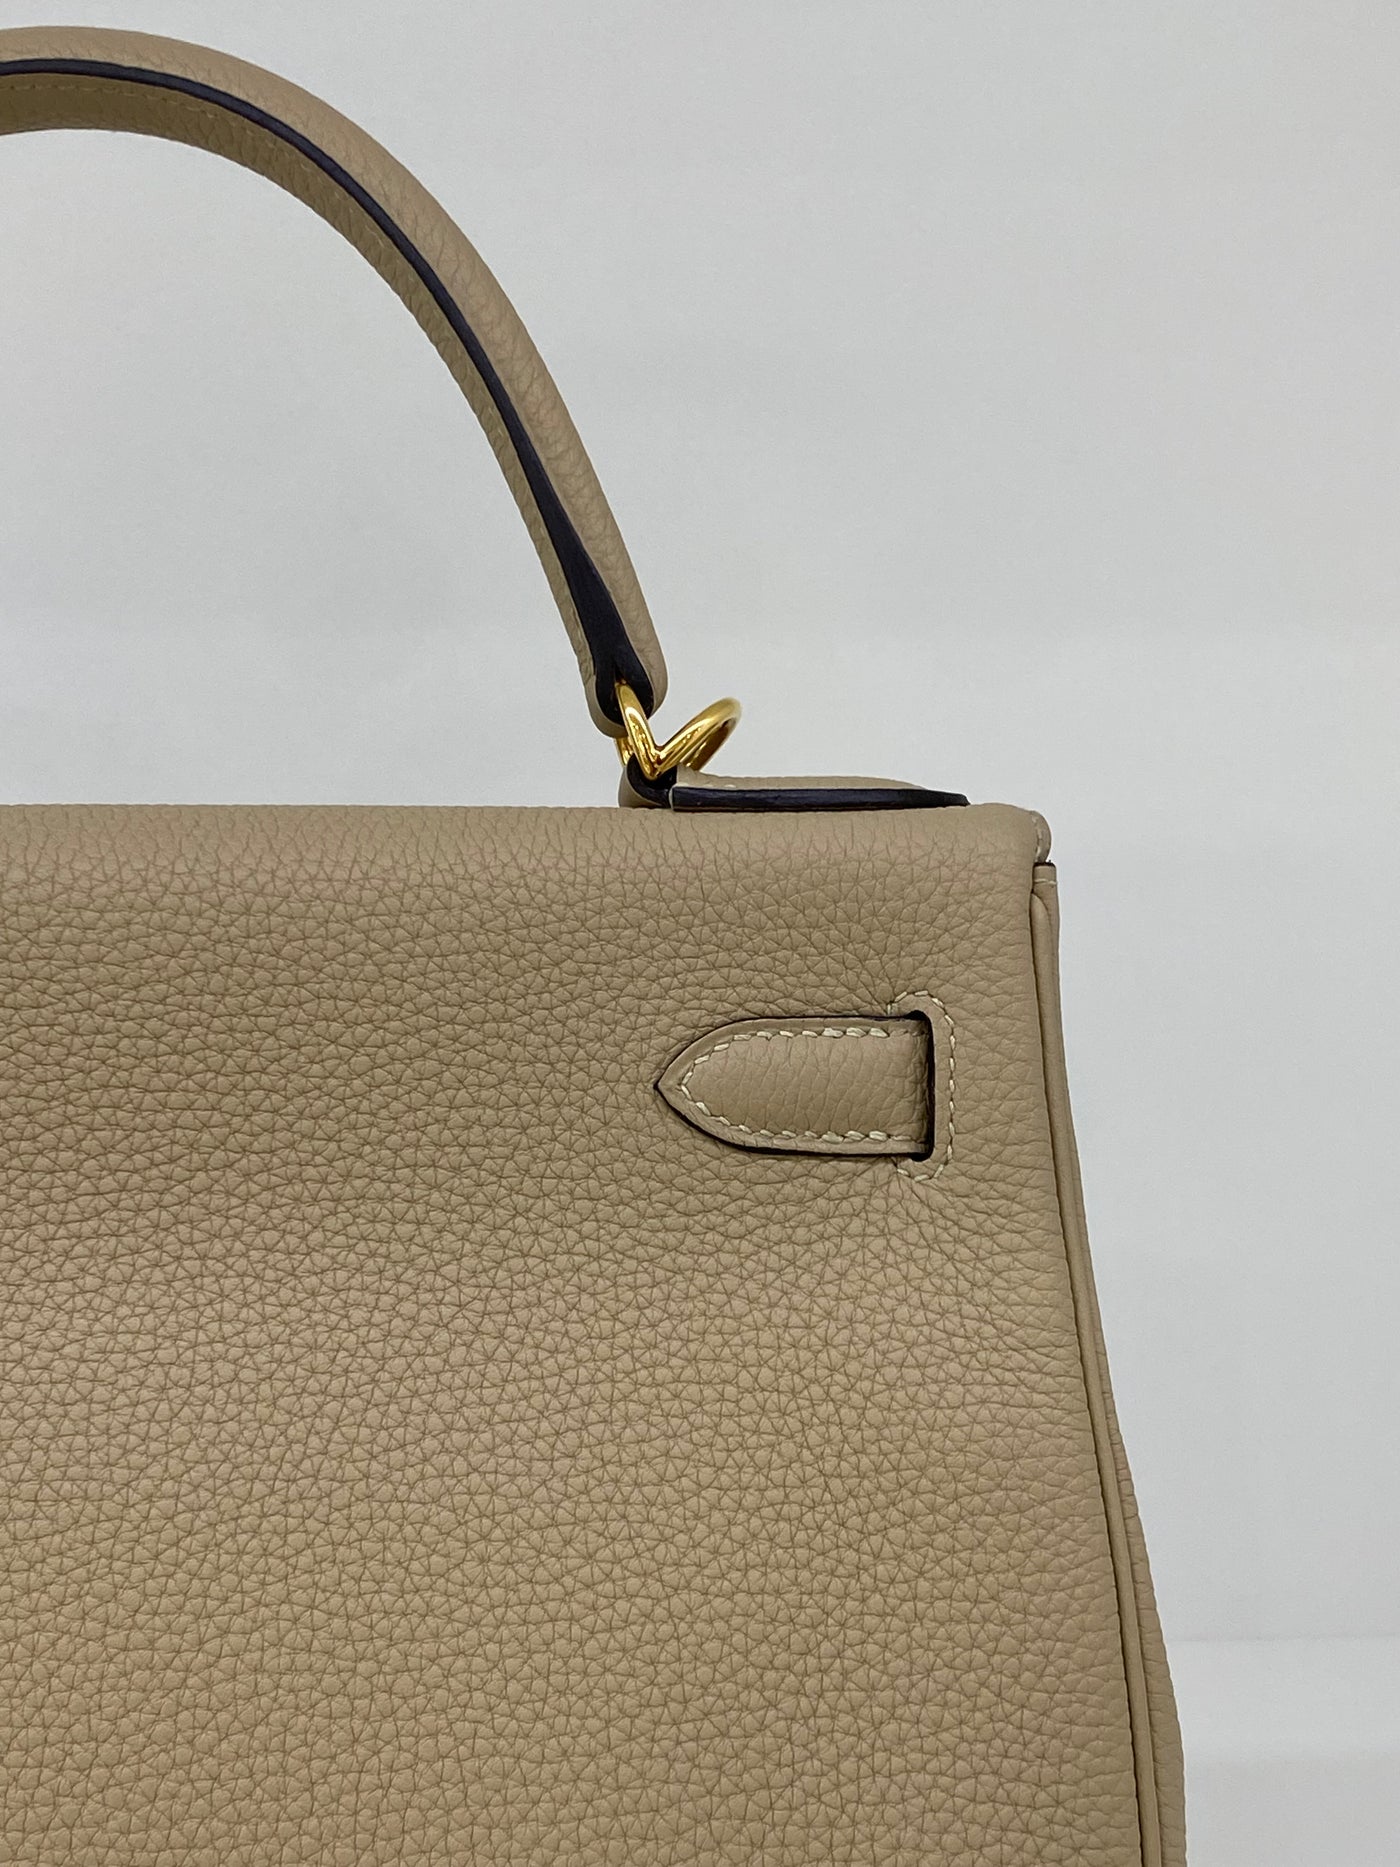 Hermes Kelly 28 Trench GHW